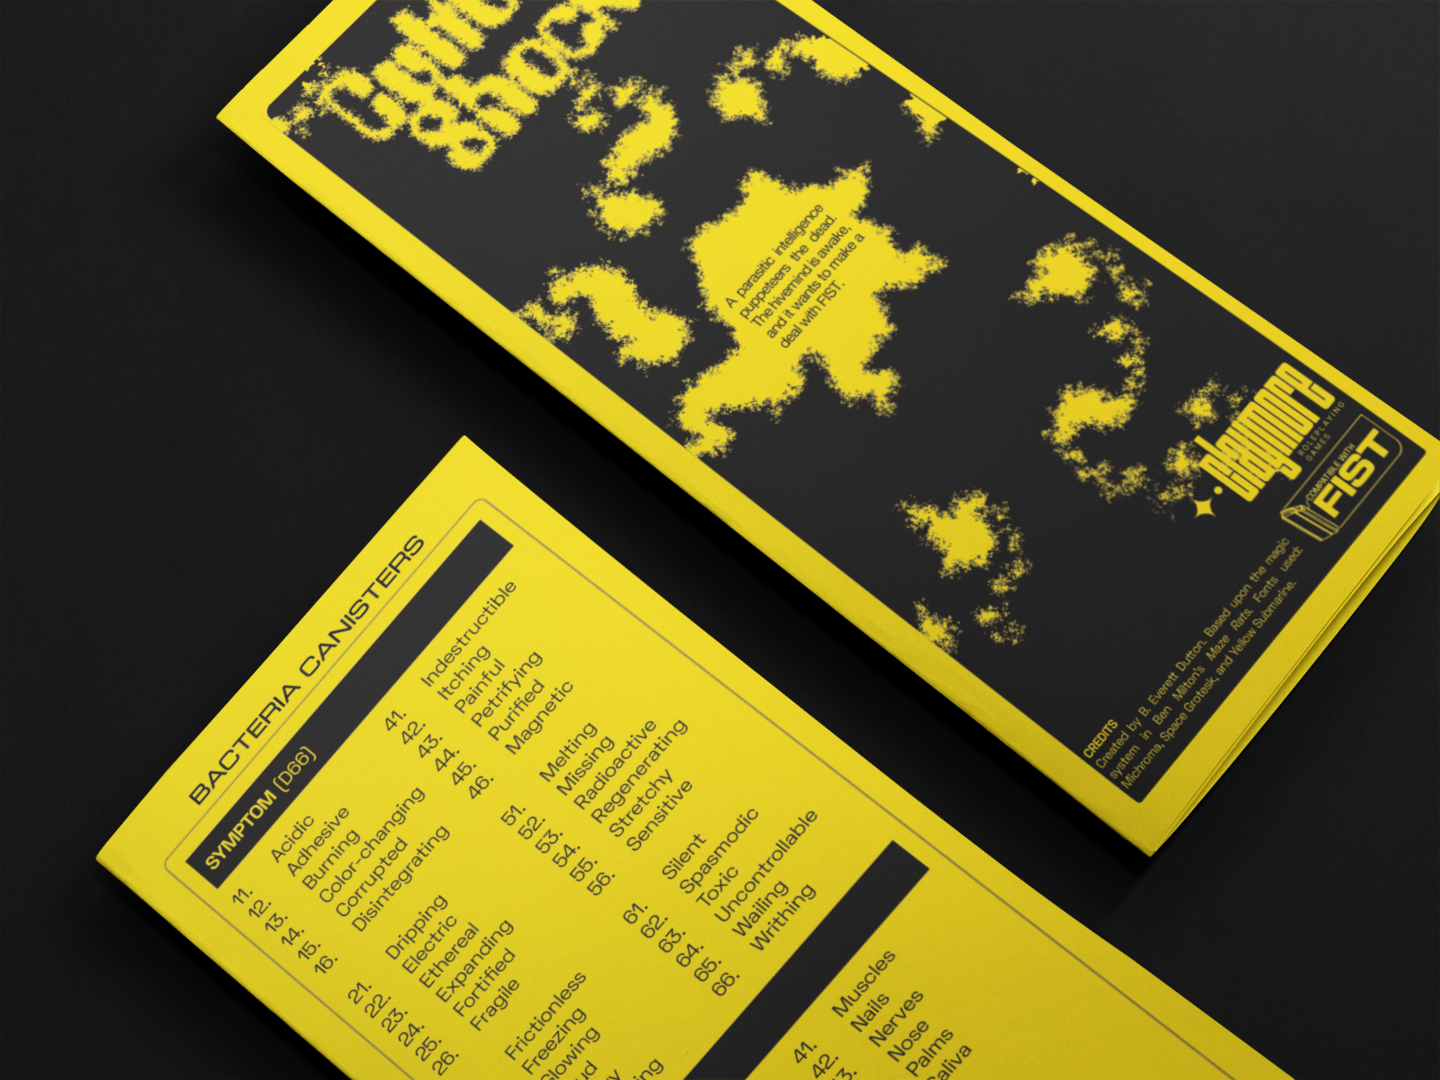 A mockup of the bright yellow and black CULTURE SHOCK pamphlet. Two copies are on a black table, showing the psychedelic cover art and the back.